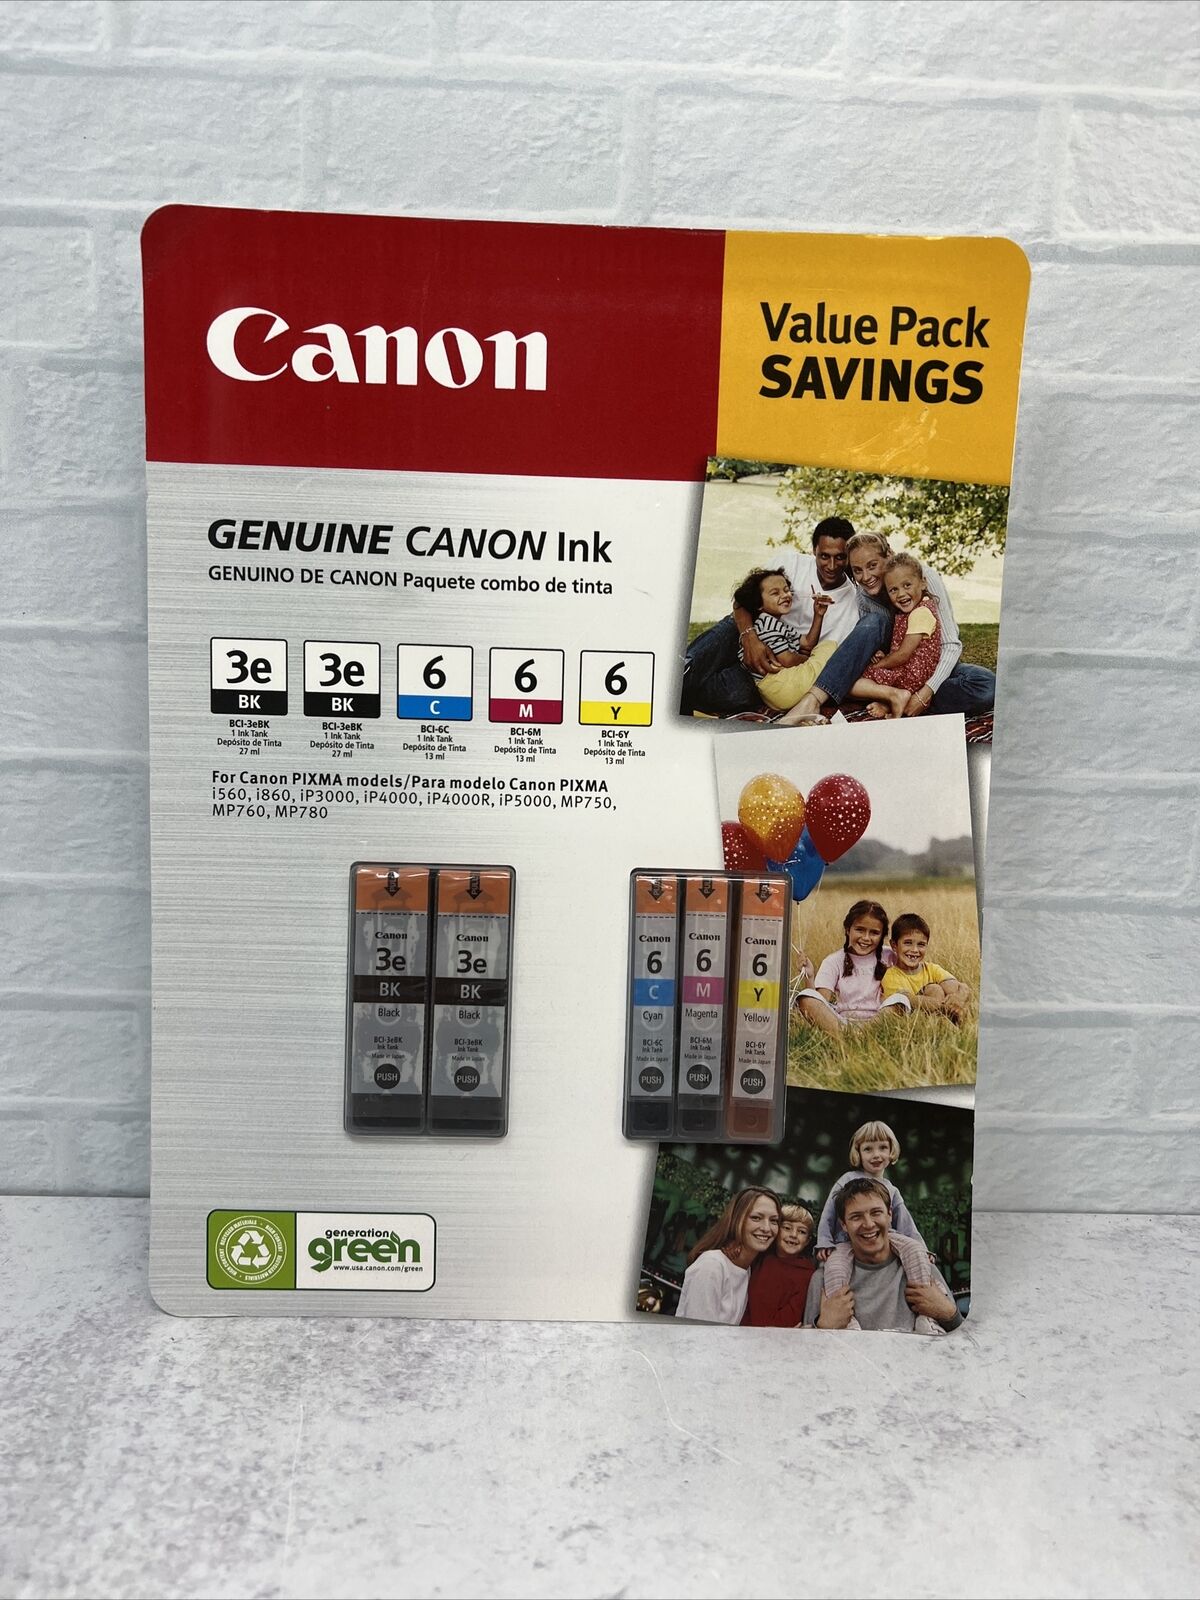 Canon Value Pack Savings Ink 3E Black 6 CMY Sealed New